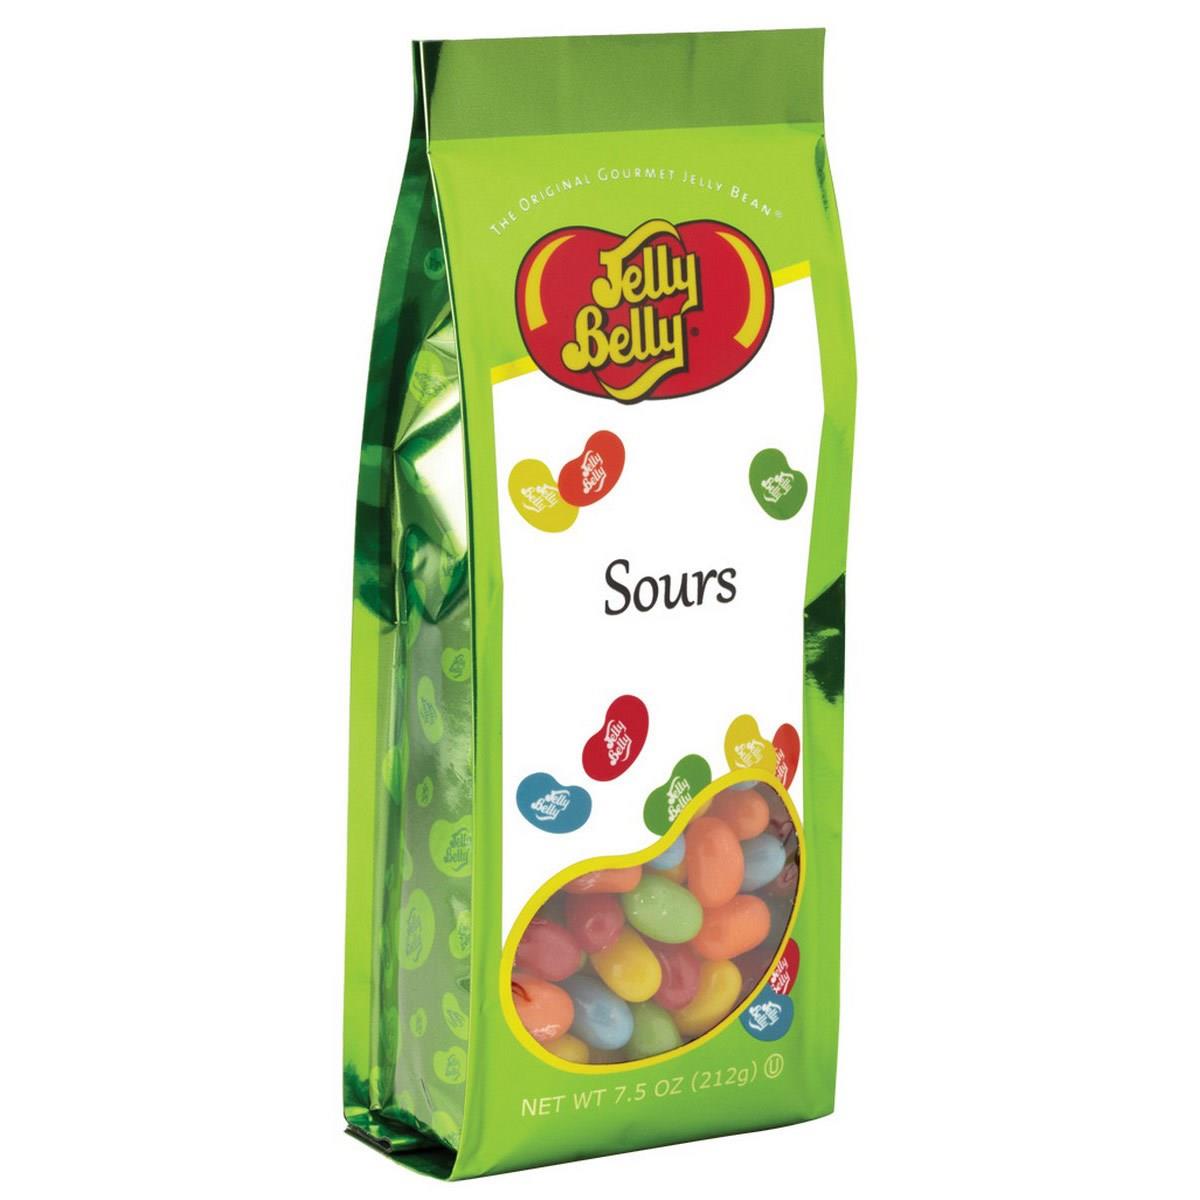 Jelly Belly Sours Jelly Beans - 7.5oz